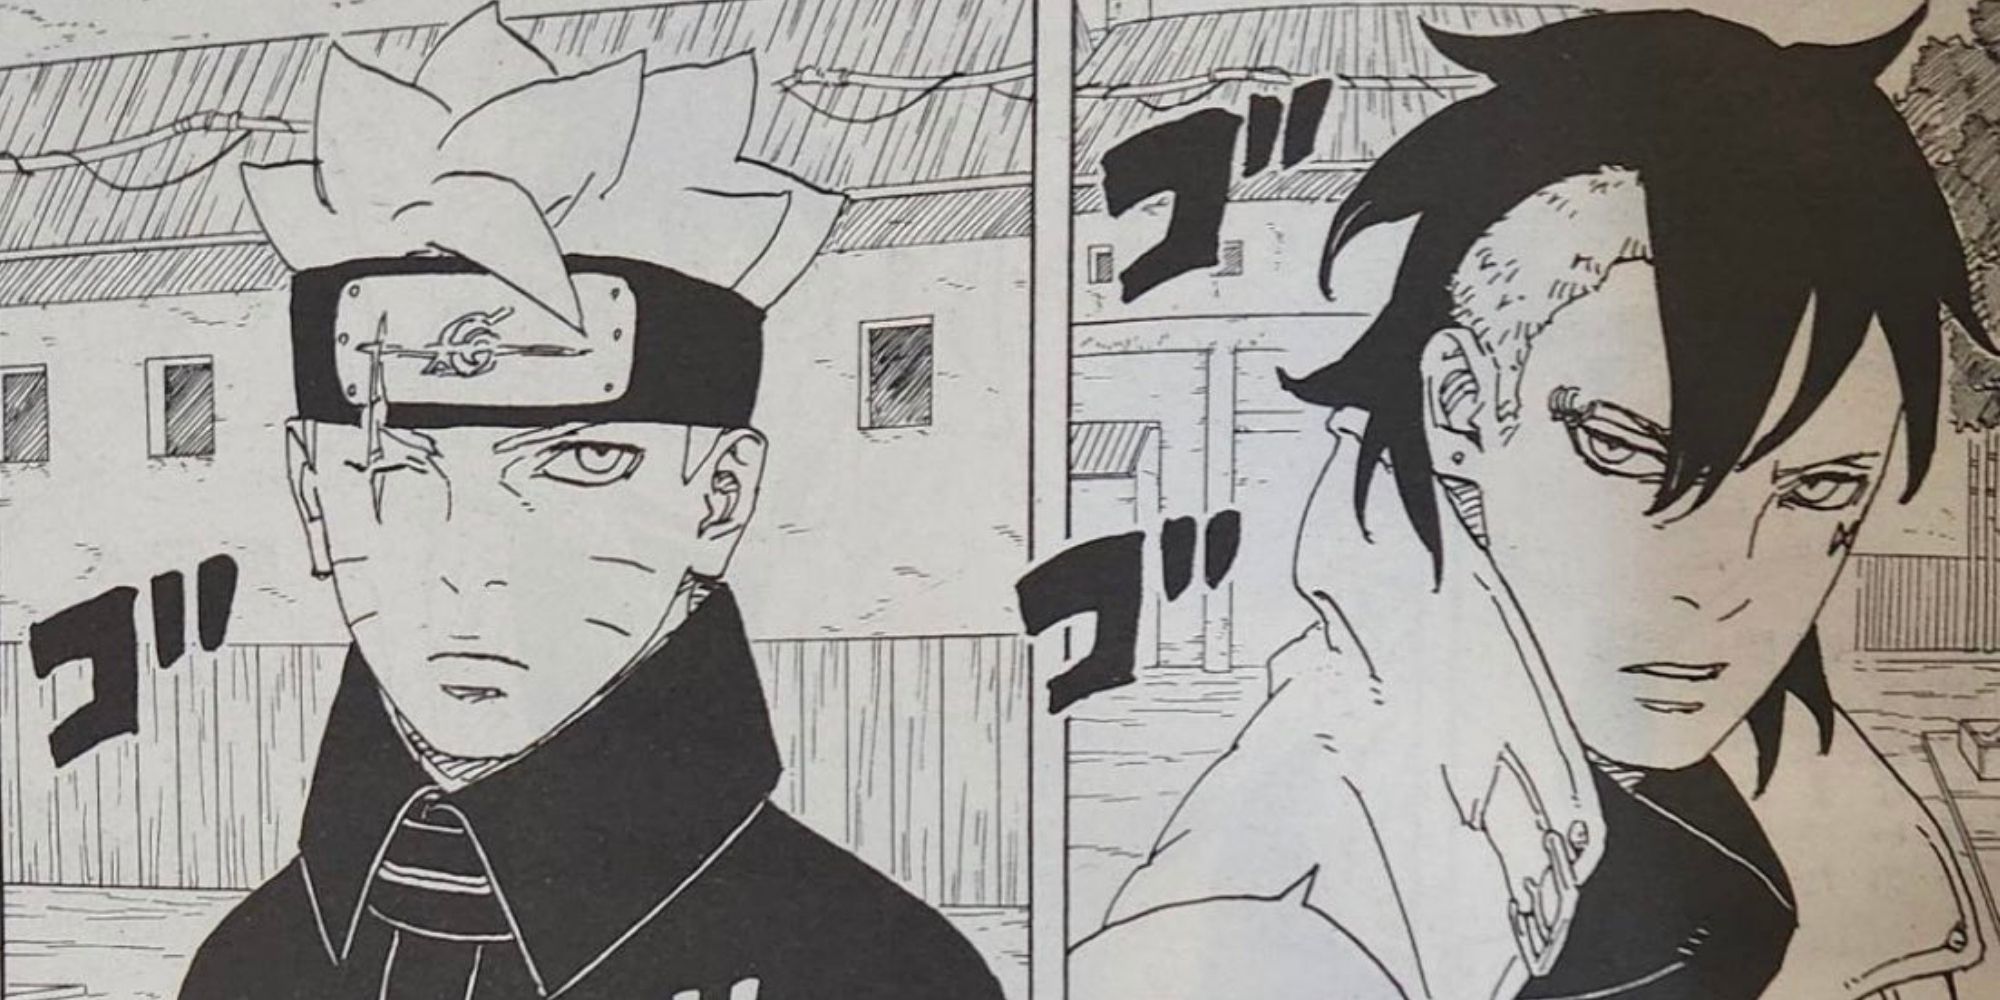 Boruto: Two Blue Vortex Chapter 3 Release Date, Time, And Spoilers